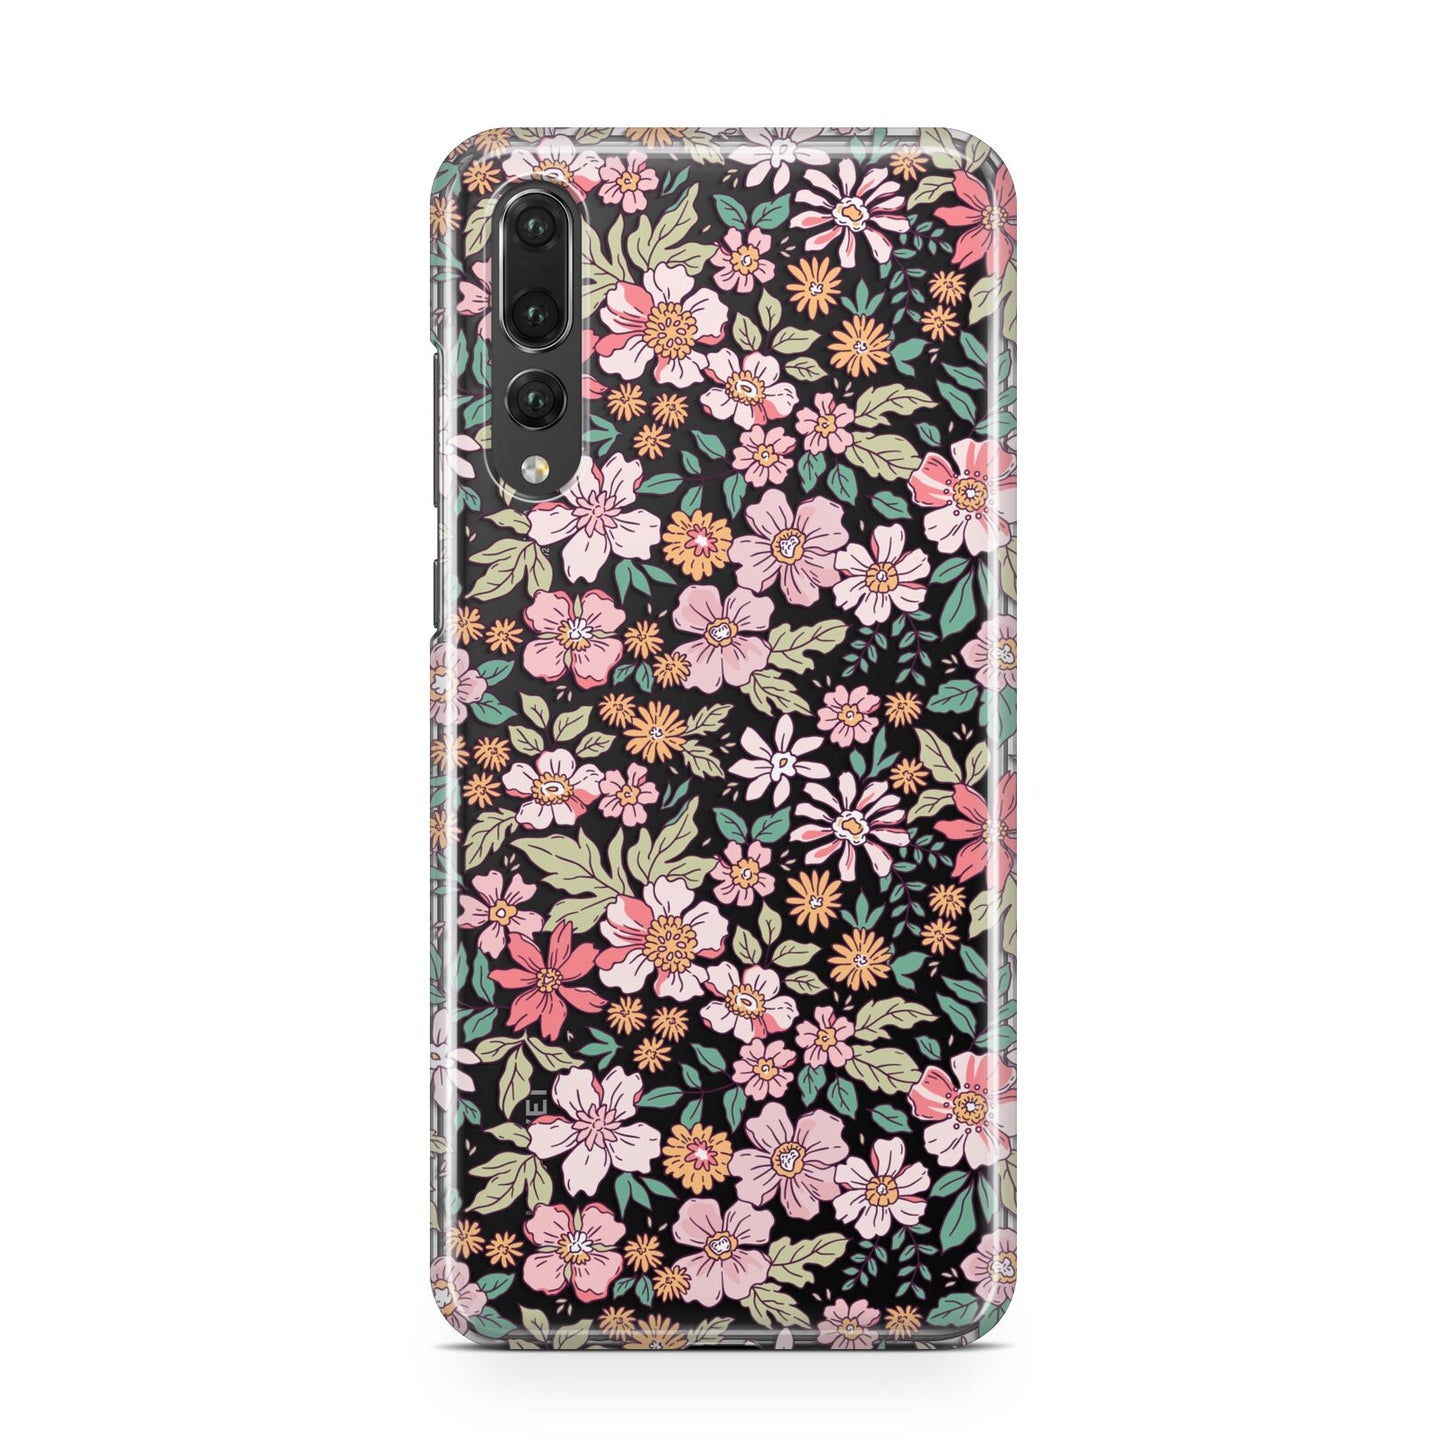 Small Floral Pattern Huawei P20 Pro Phone Case